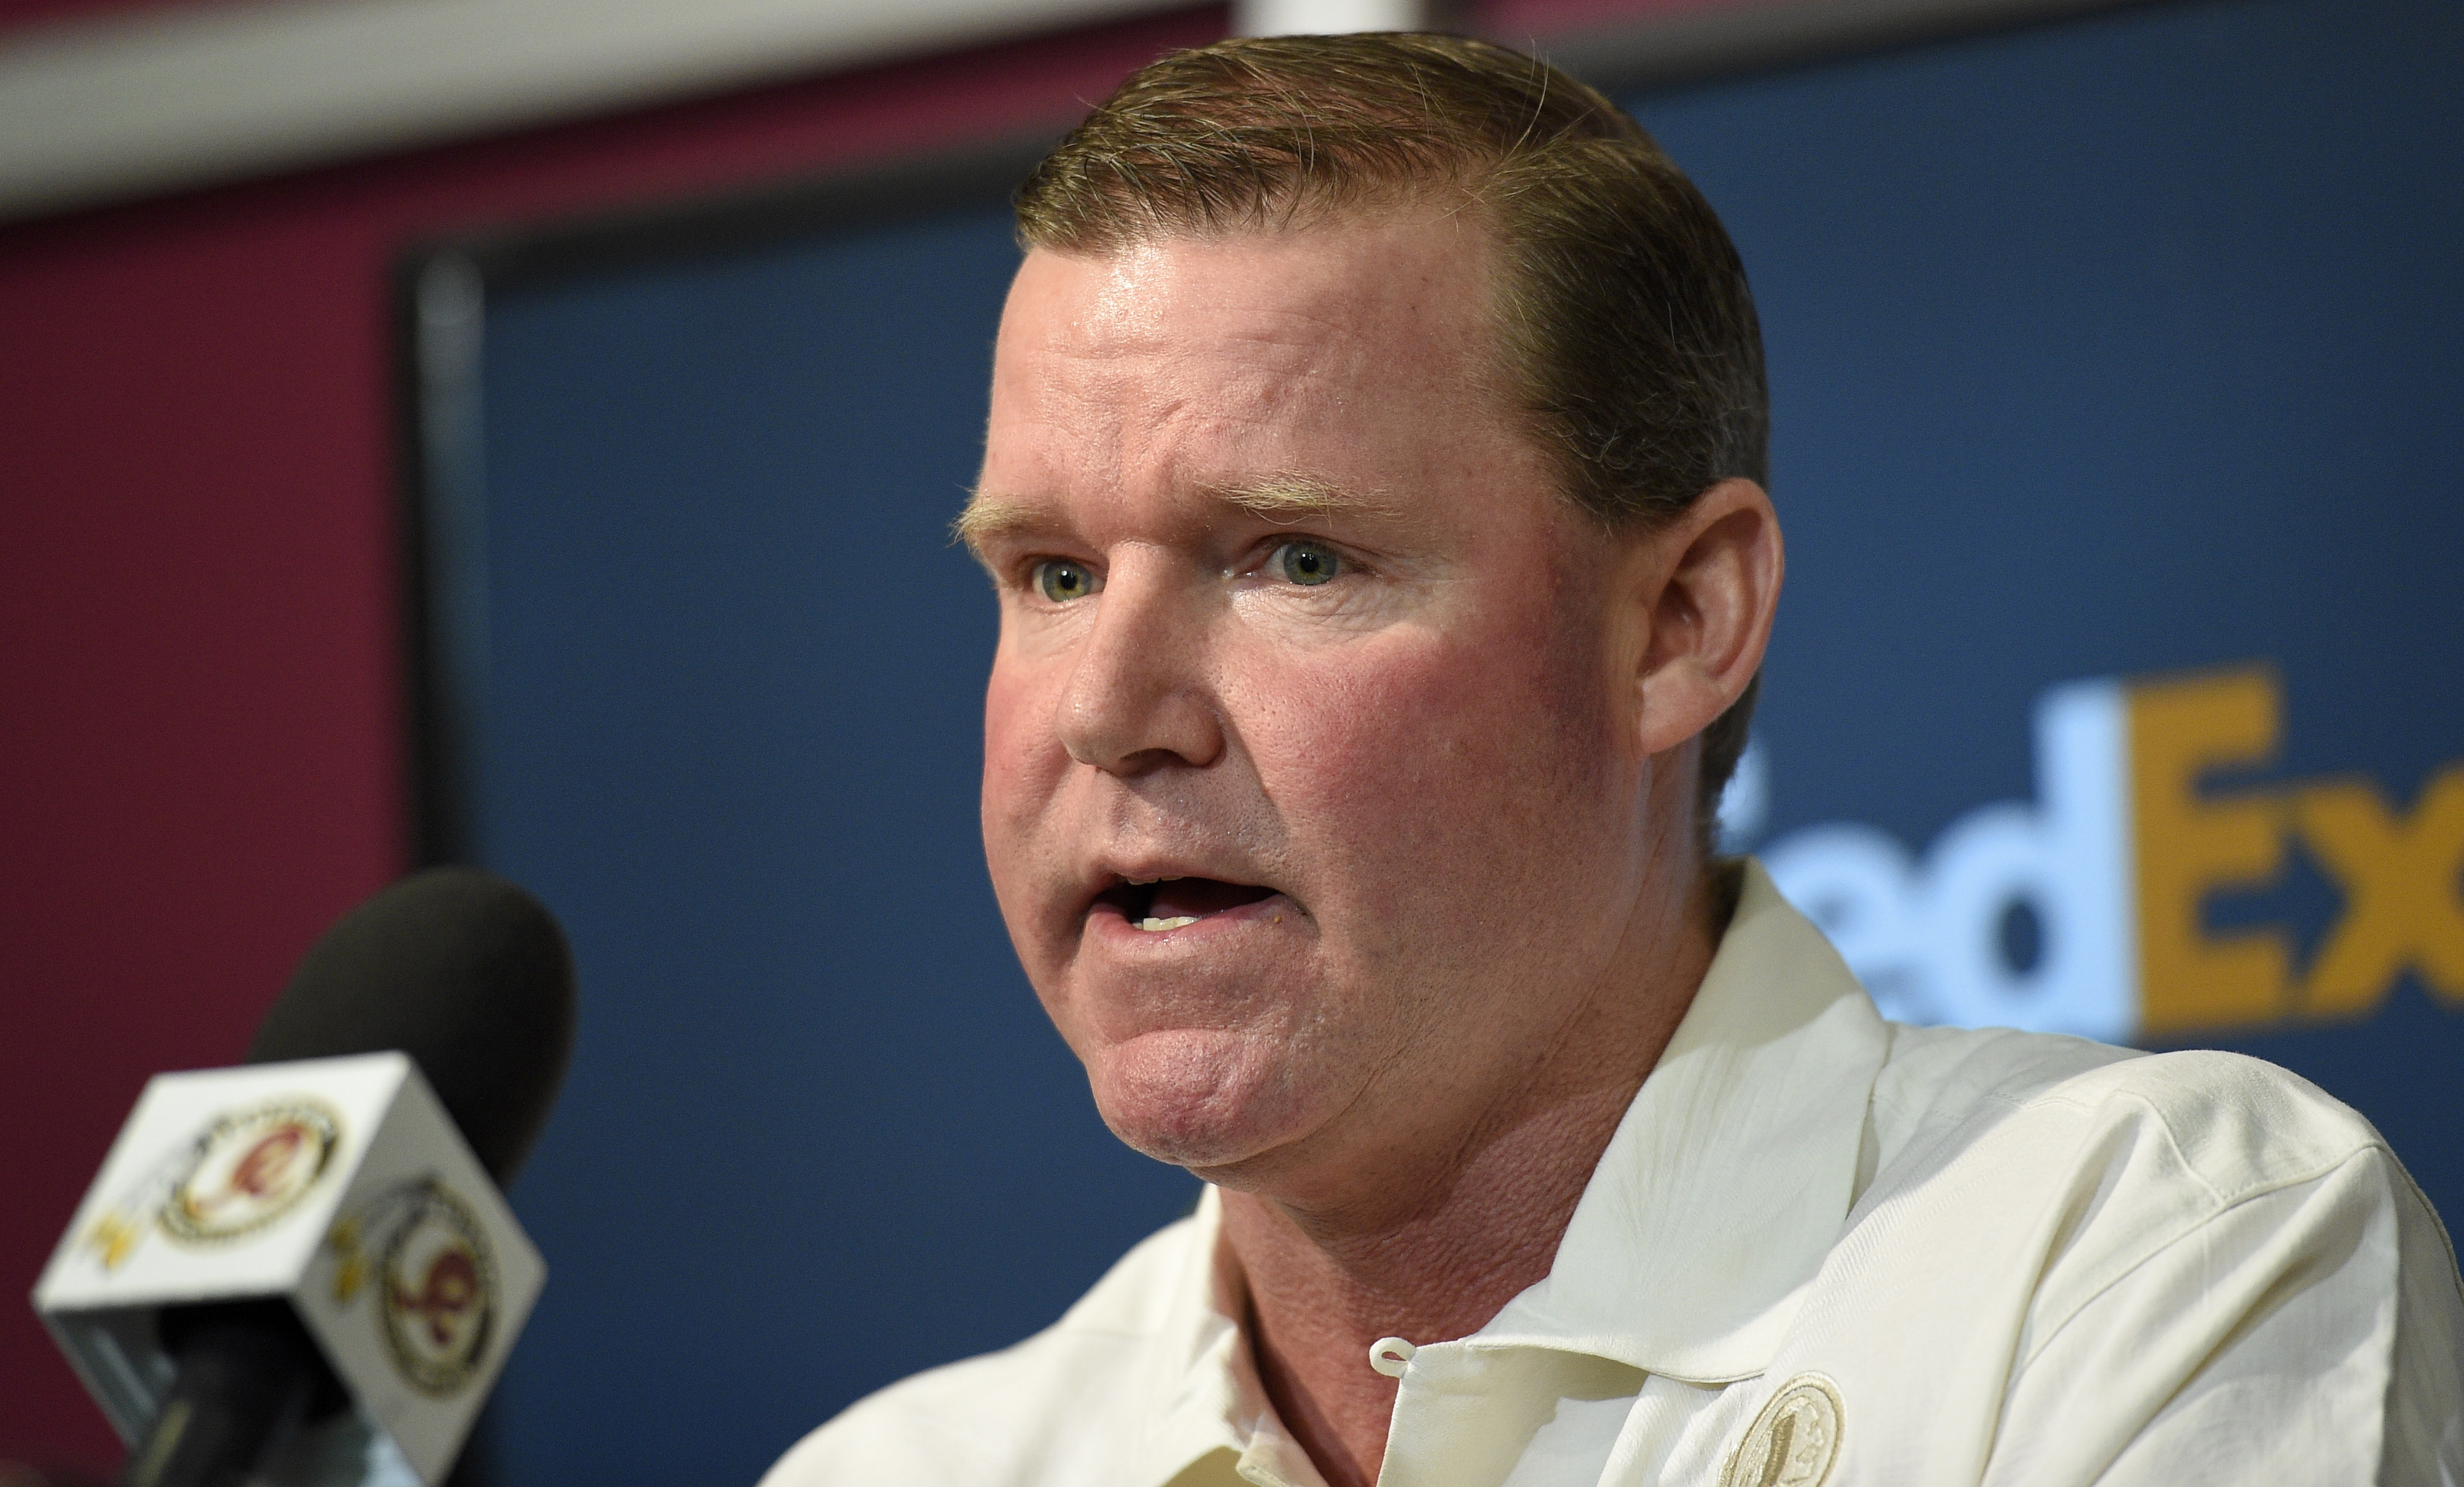 Wife of Redskins GM apologizes for lewd tweets to reporter